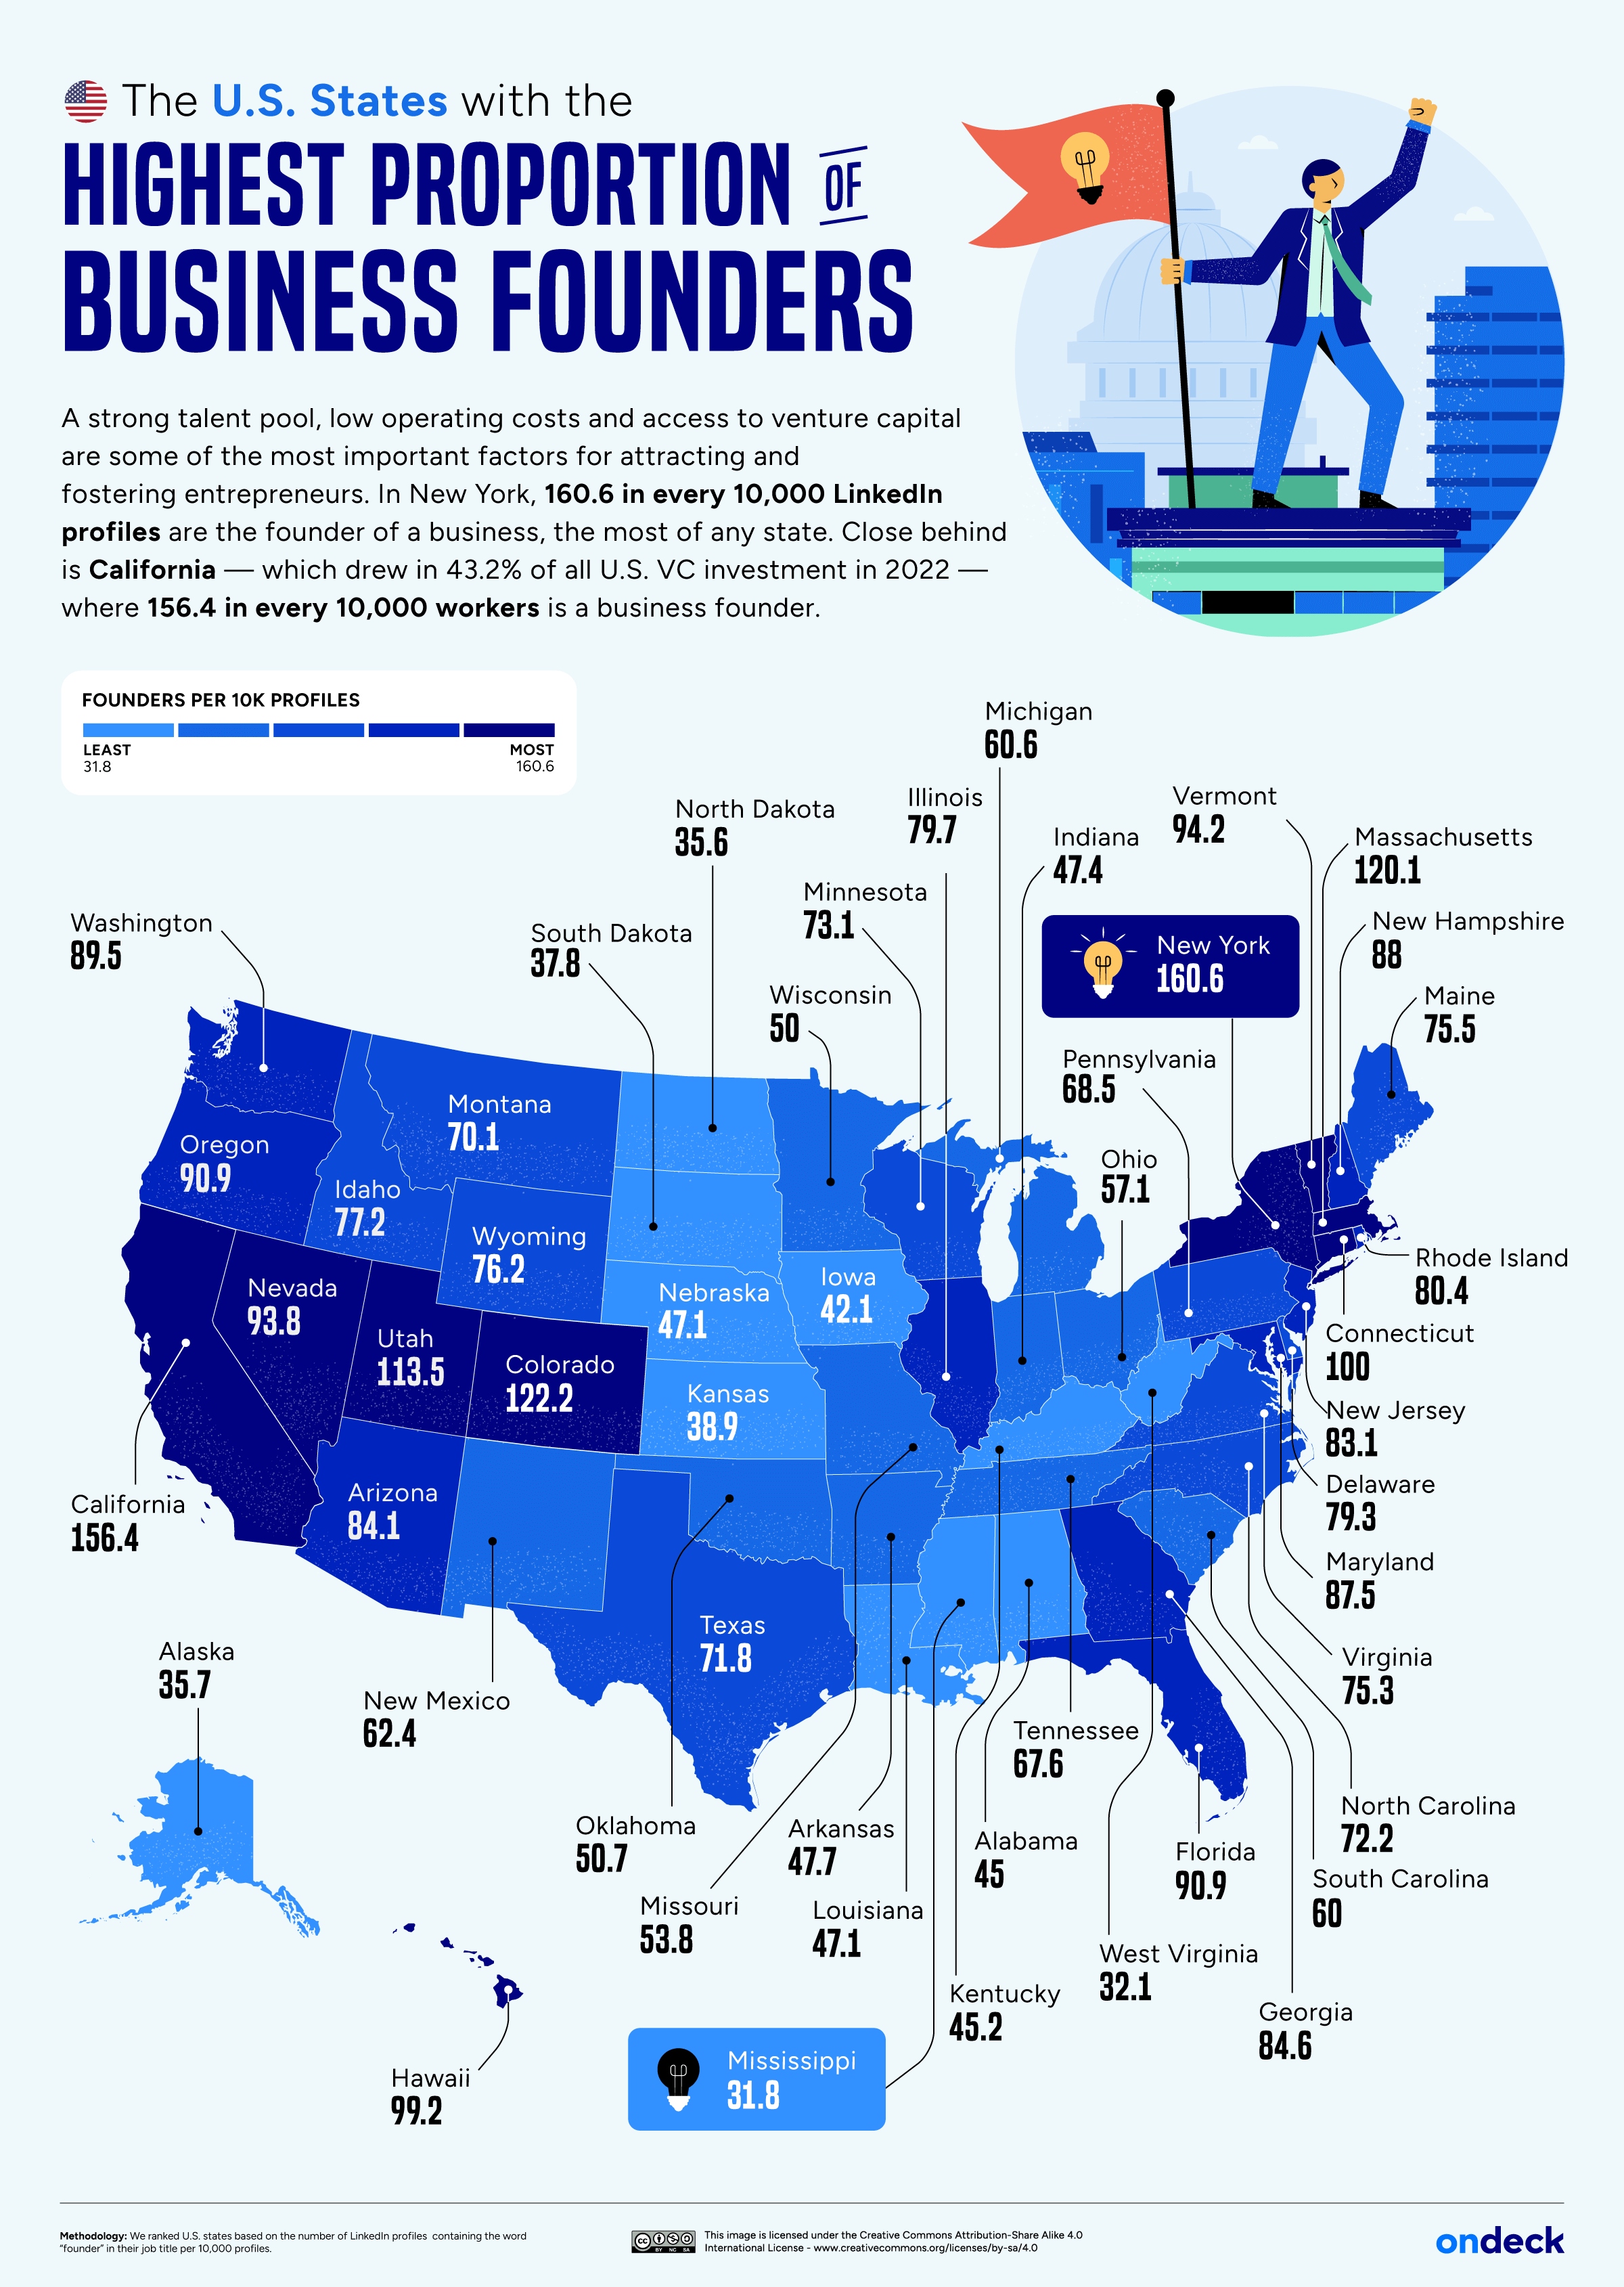 Map of the U.S. states with the most business founders